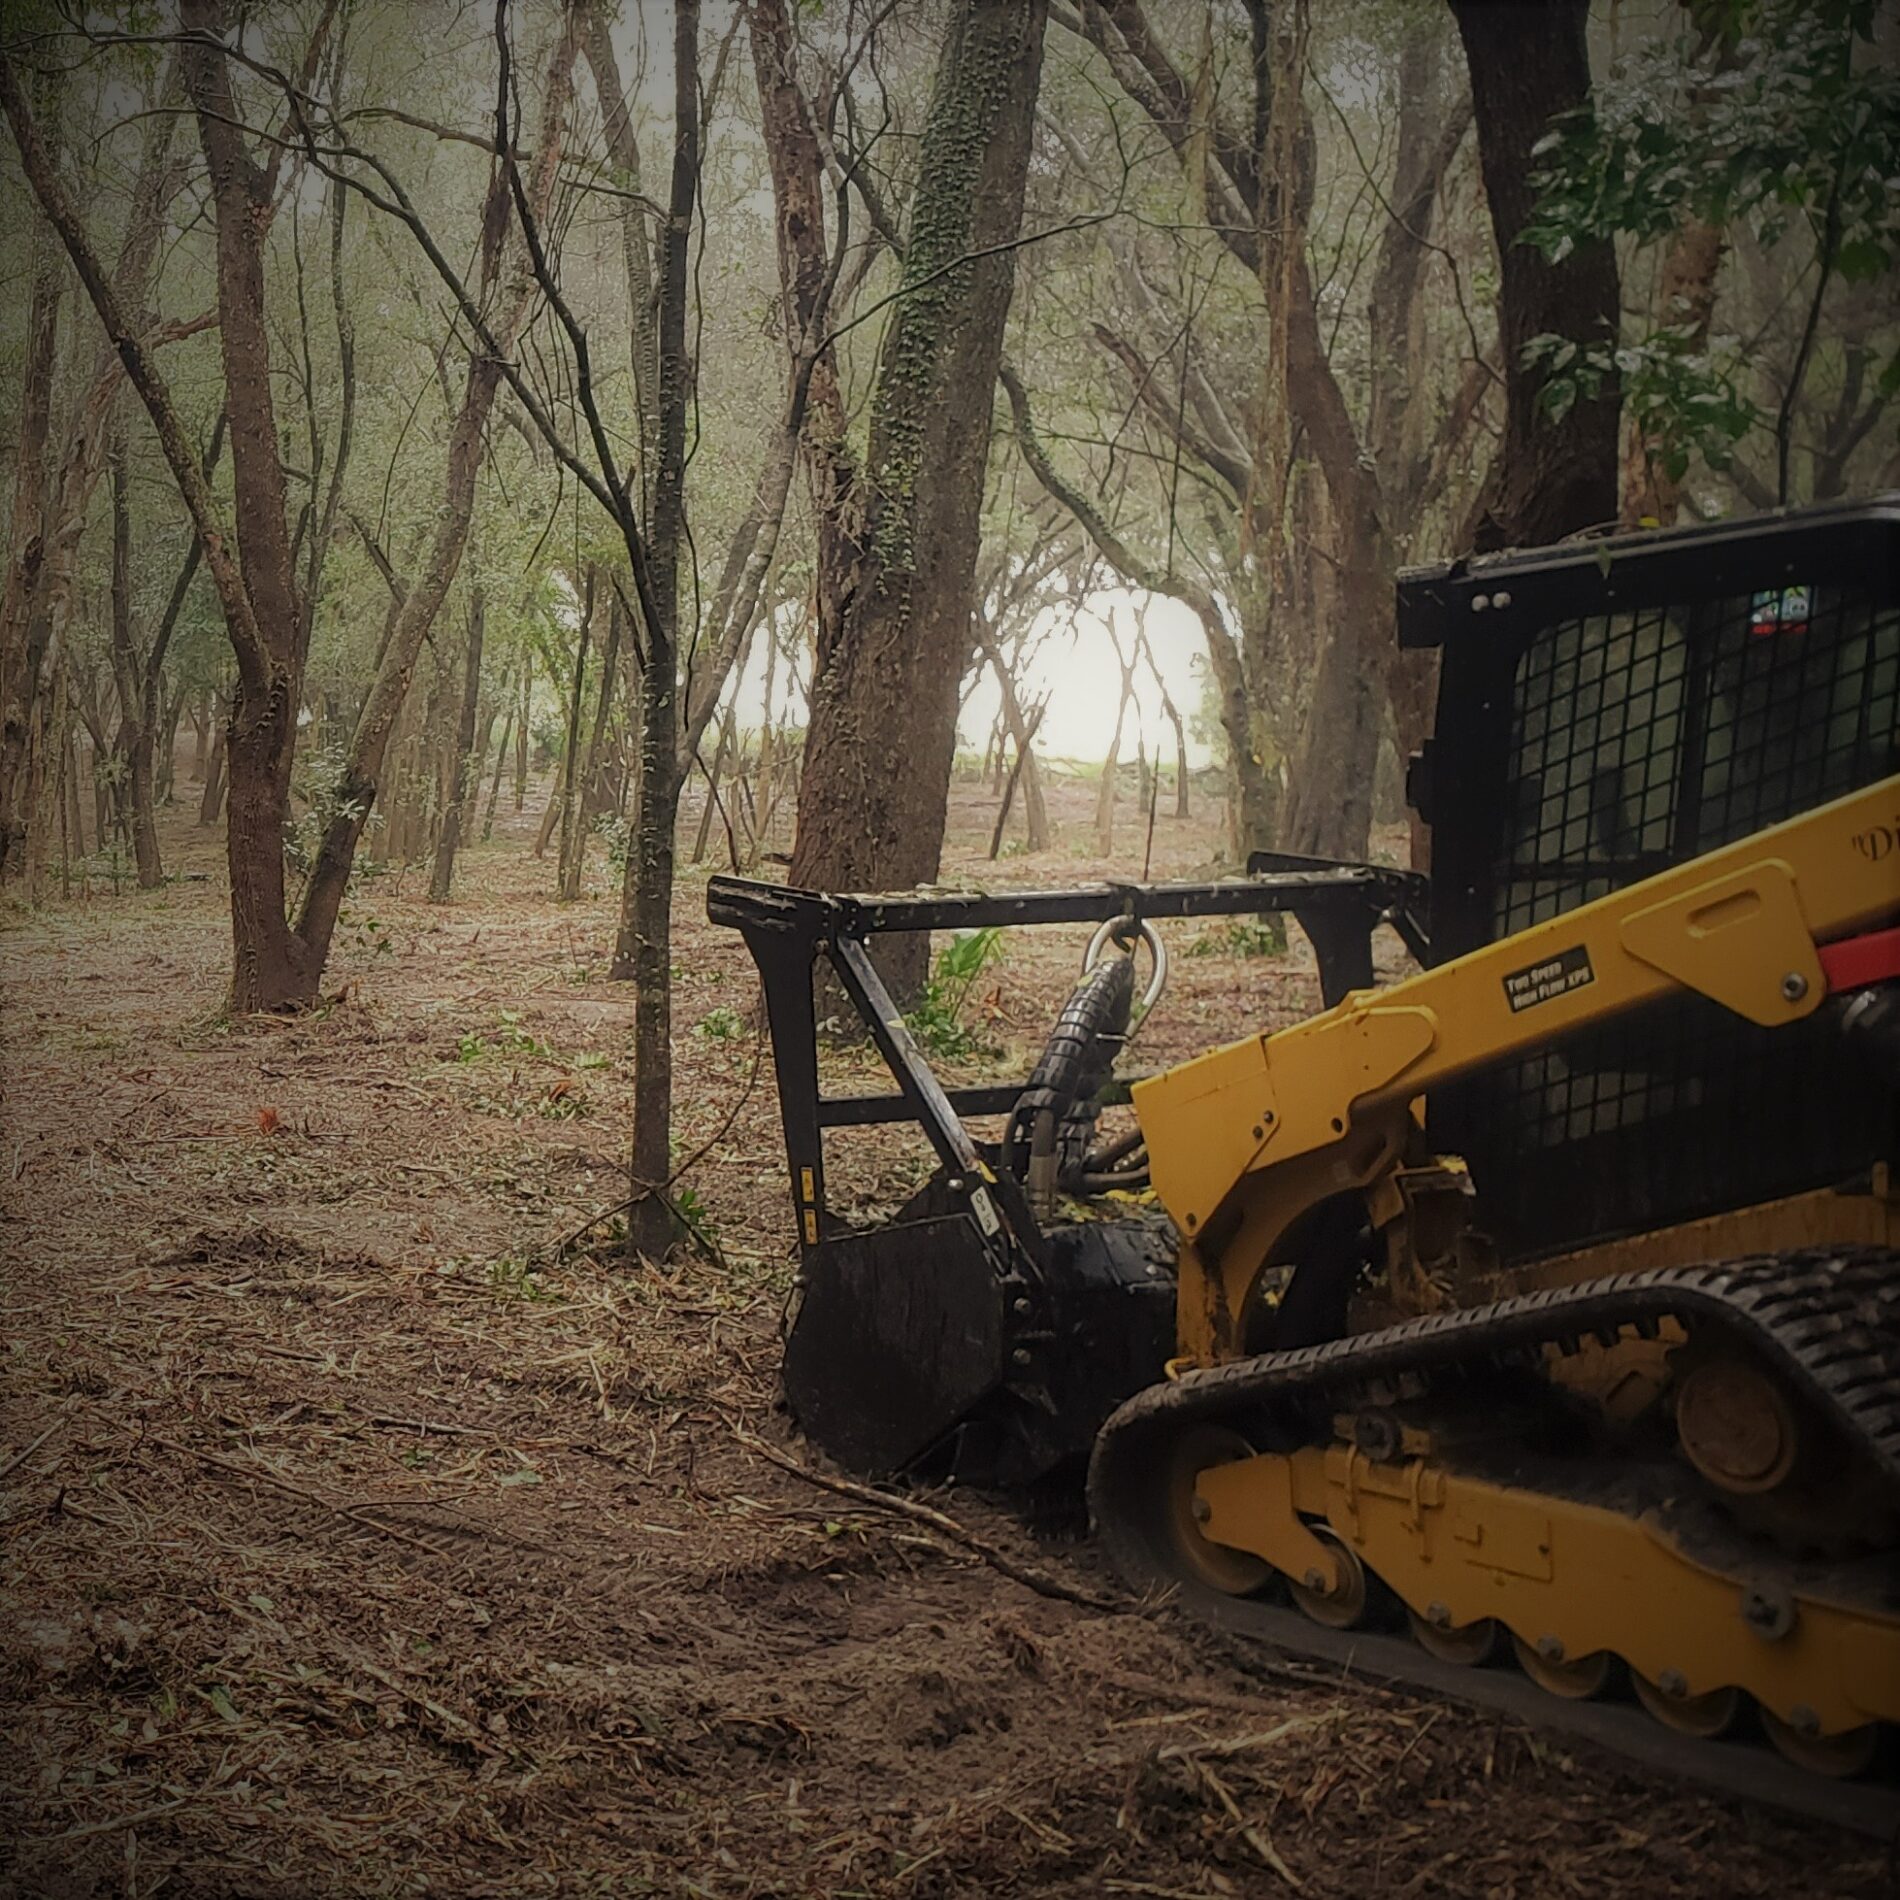 A CAT forestry mulcher in a wooded area.